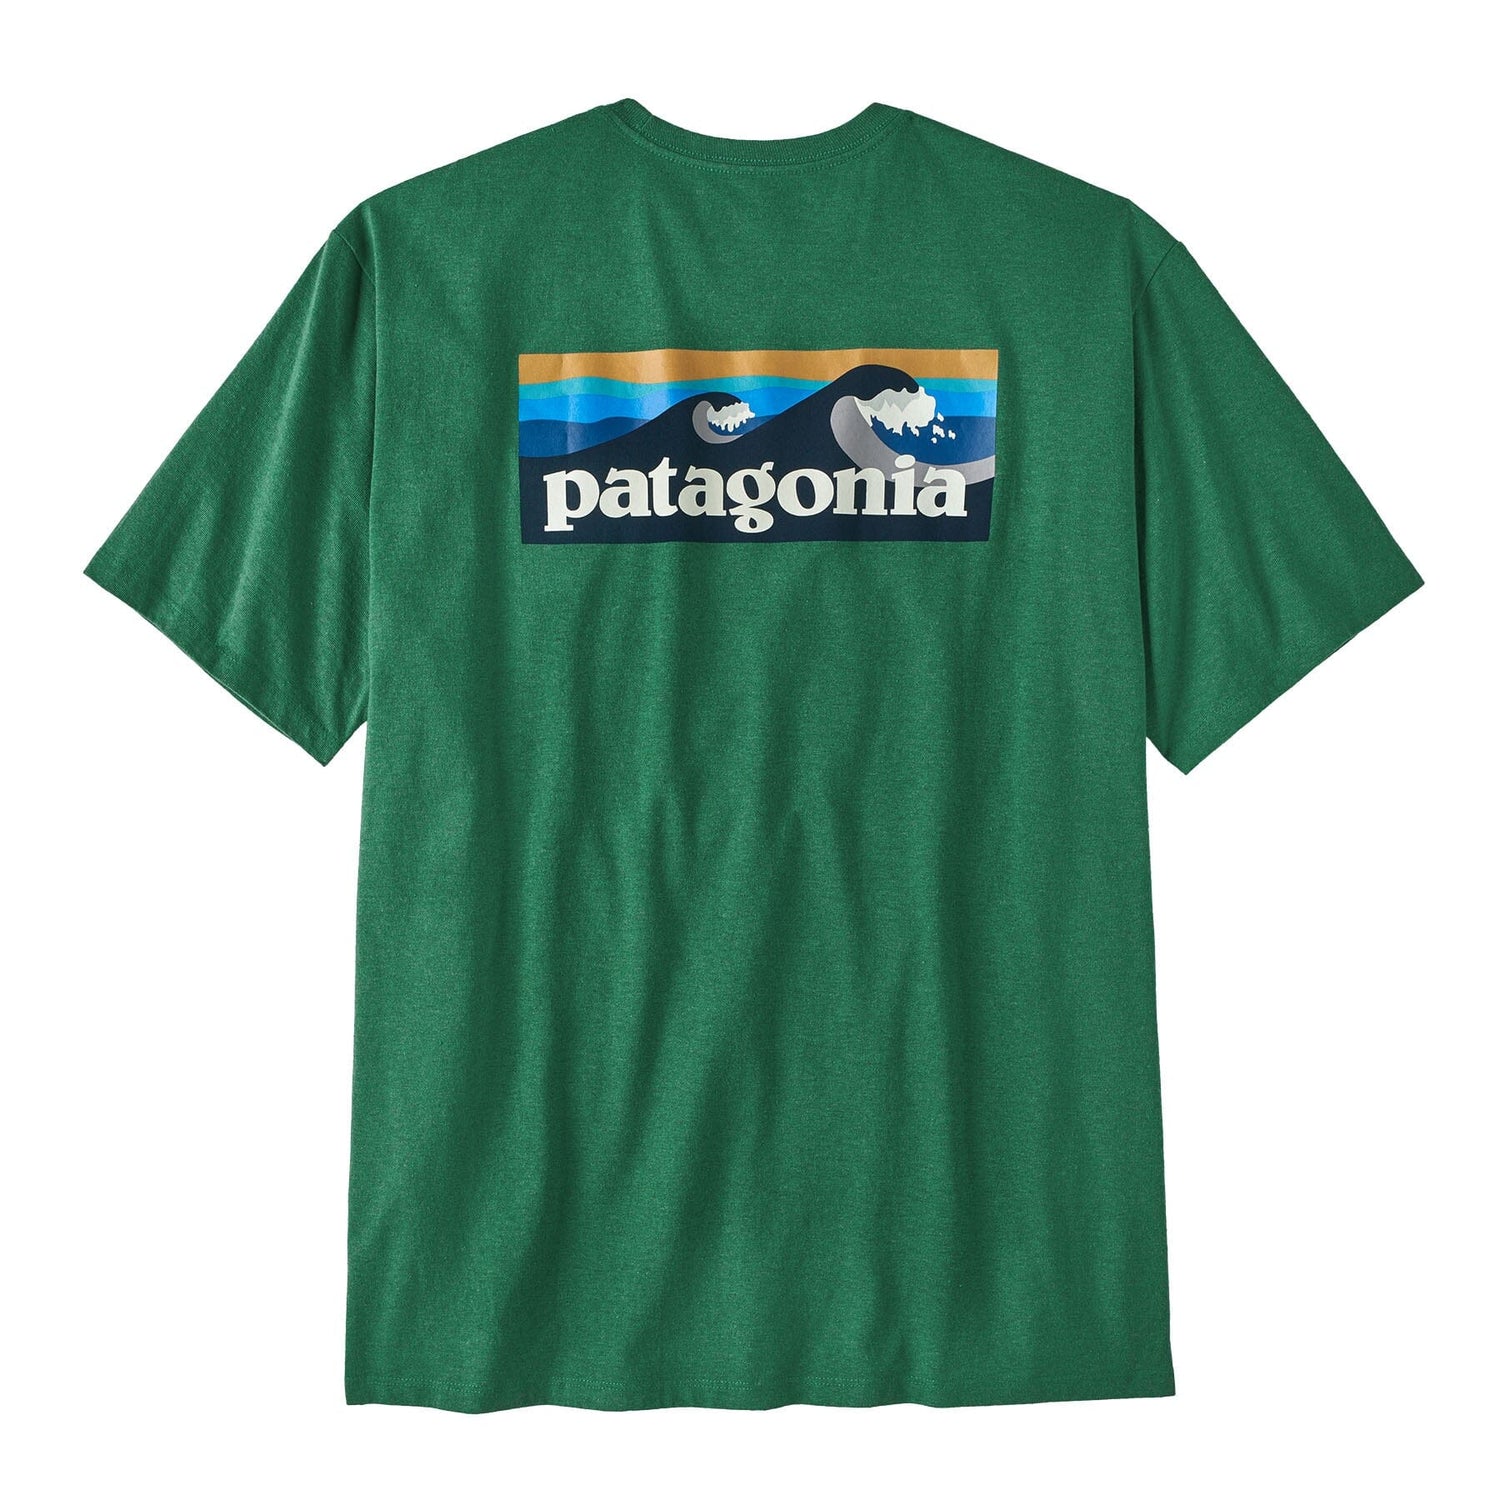 Patagonia - M's Boardshort Logo Pocket Responsibili-Tee - Recycled Cotton & Recycled Polyester - Weekendbee - sustainable sportswear